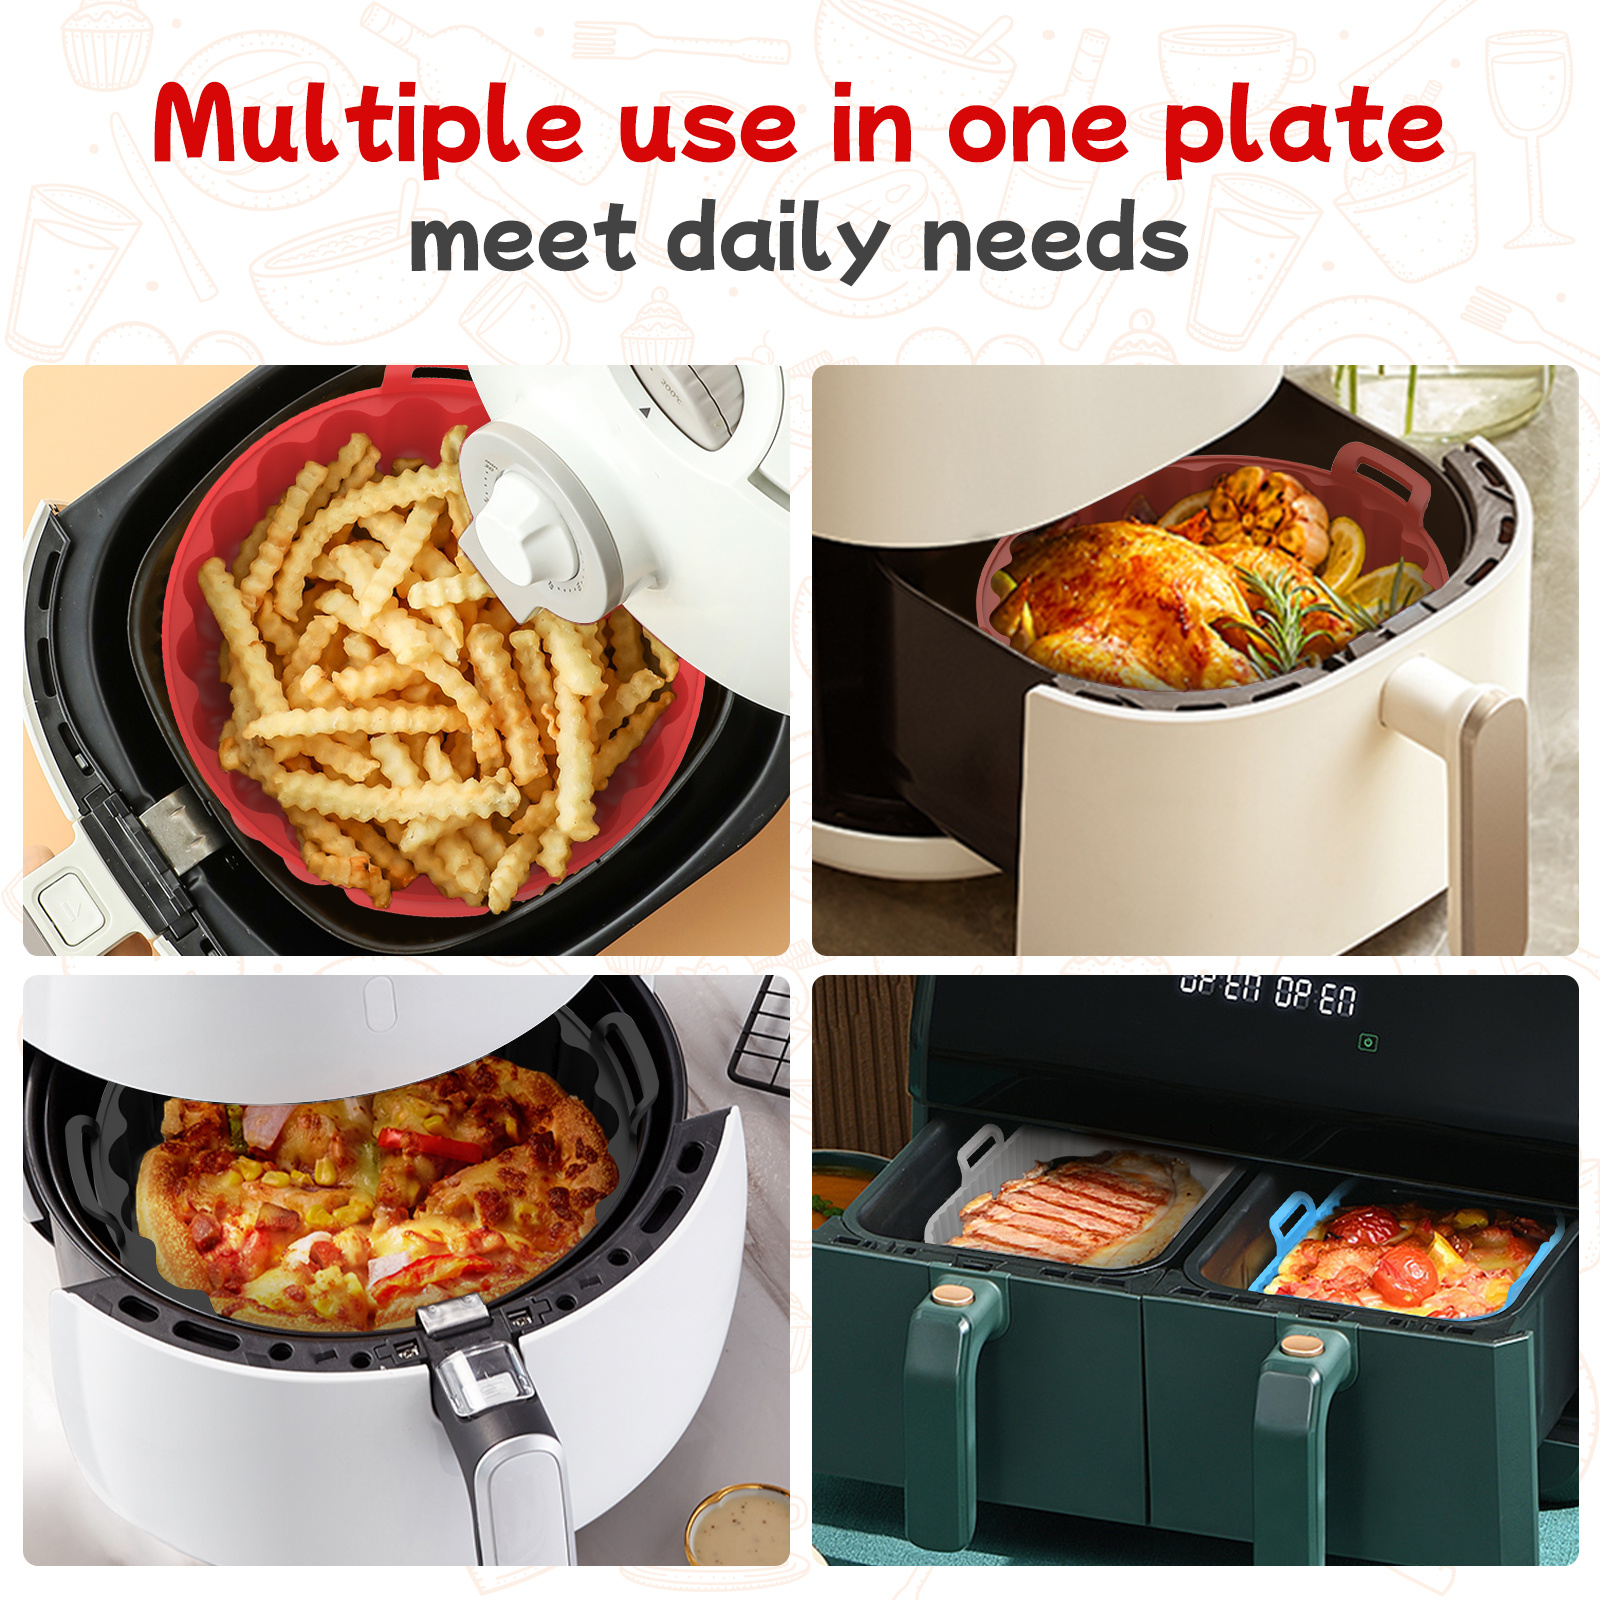 Bpa Free Large Round Square Shape Silicone Air Fryer Liners - Temu